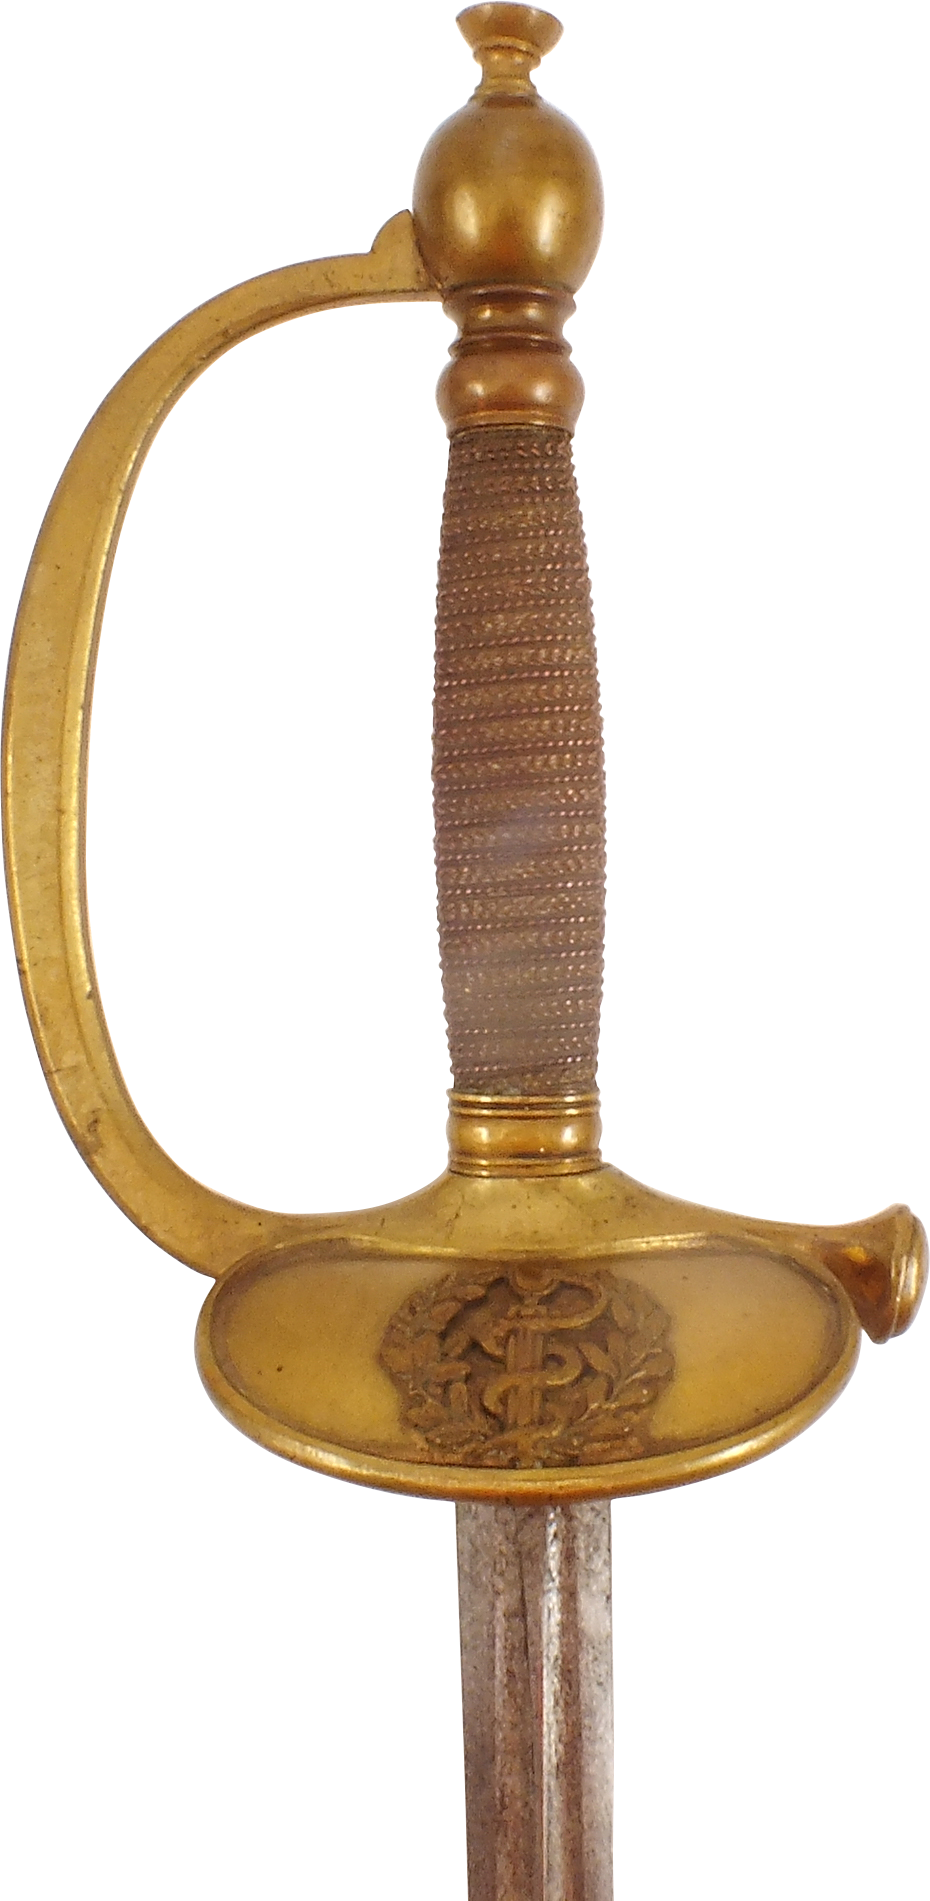 FRENCH M.1872 MEDICAL OFFICER’S SWORD - Fagan Arms